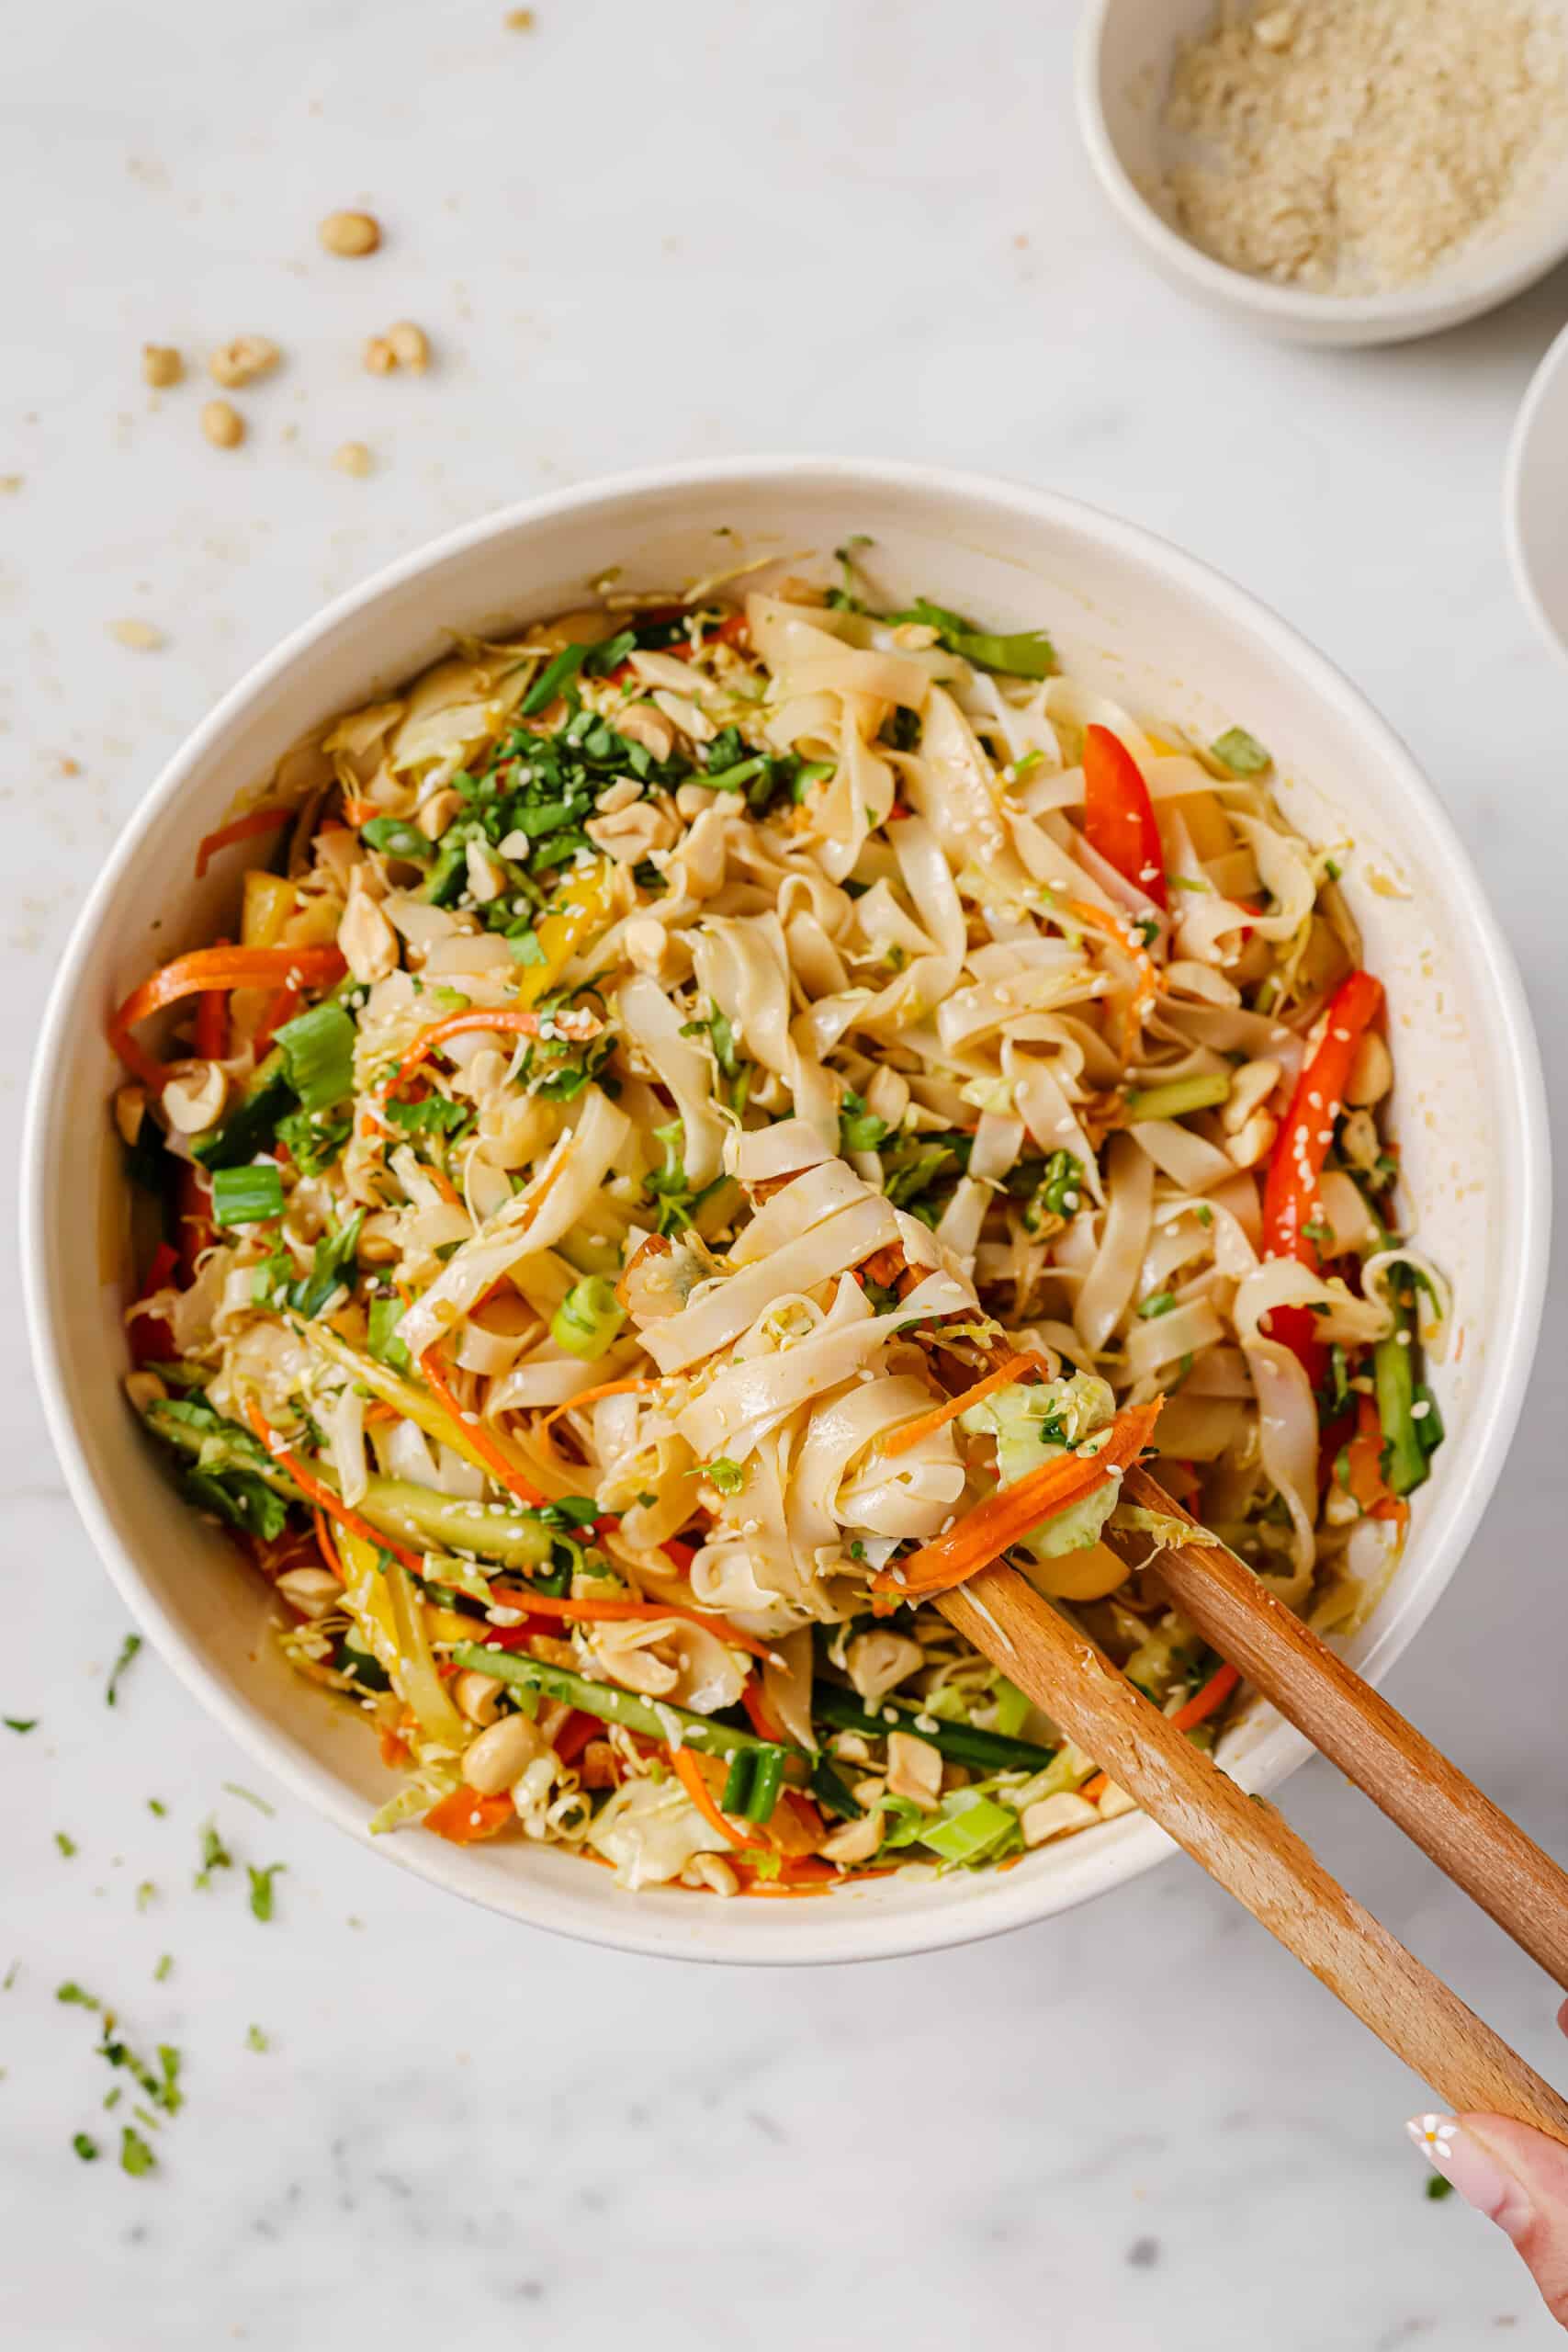 Bowl of Asian rice noodles with veggies.